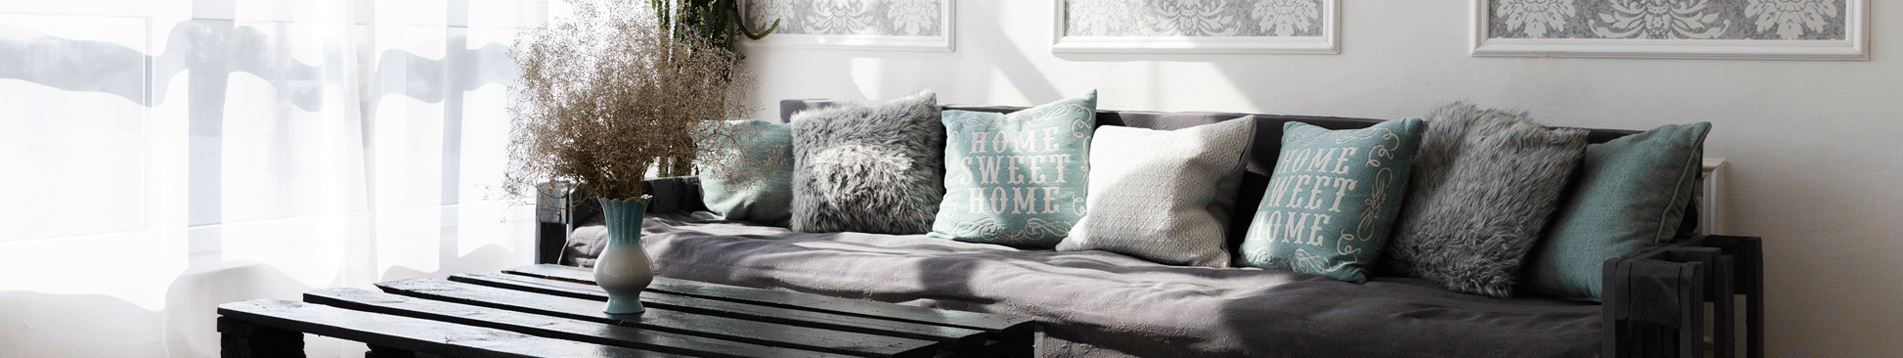 comfy sofa with home sweet home pillows